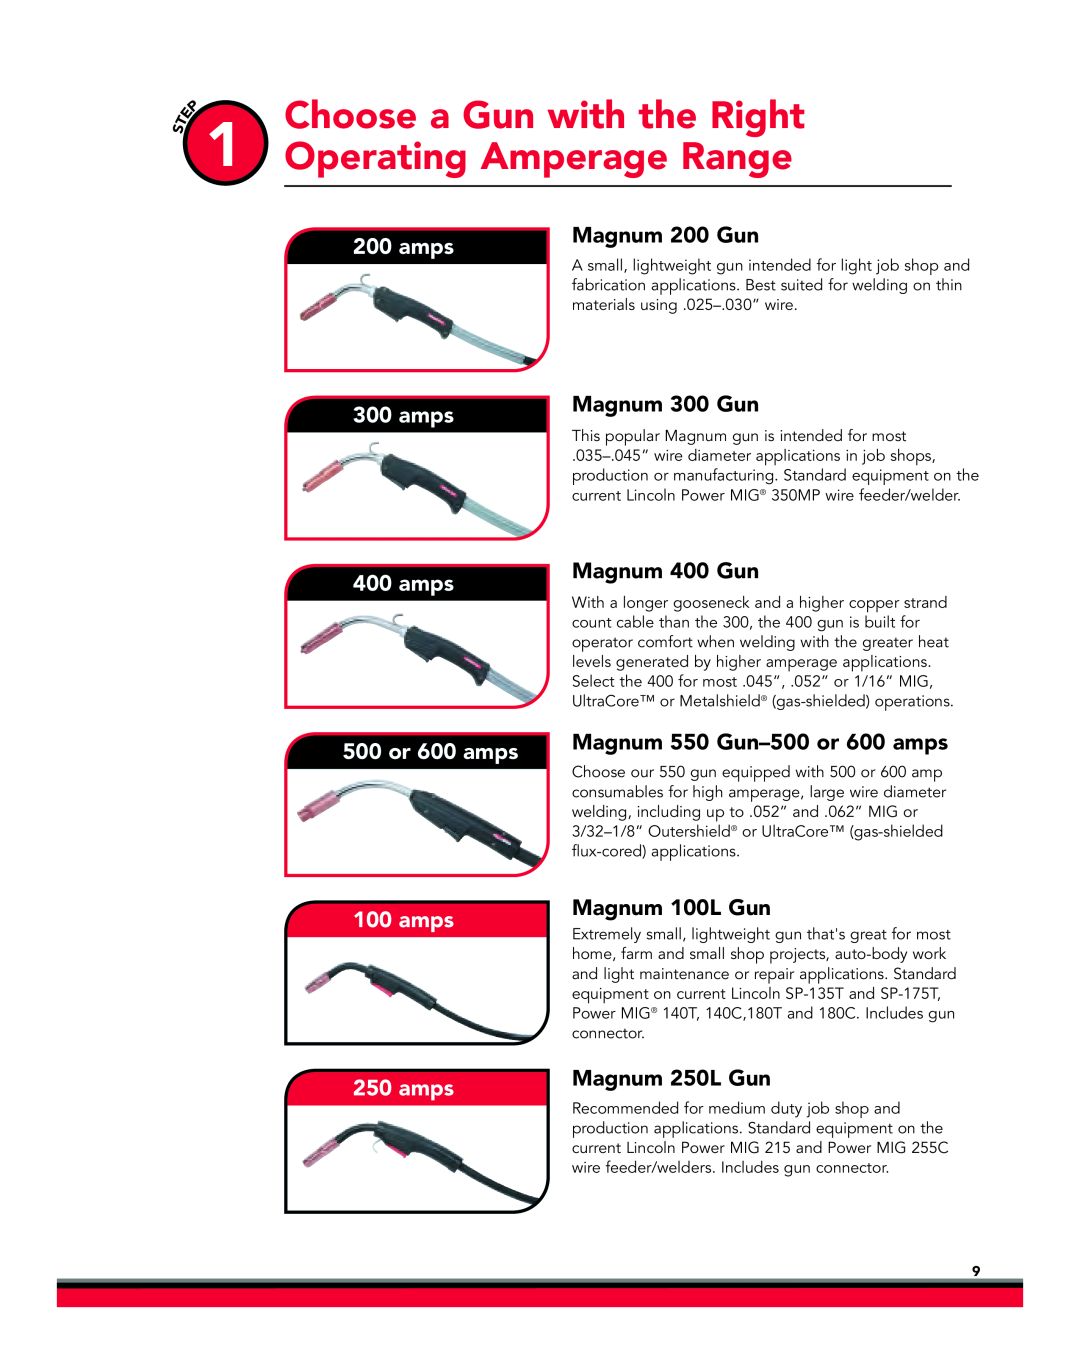 Lincoln Electric Choose a Gun with the Right Operating Amperage Range, Magnum 400 Gun, Magnum 550 Gun-500 or 600 amps 